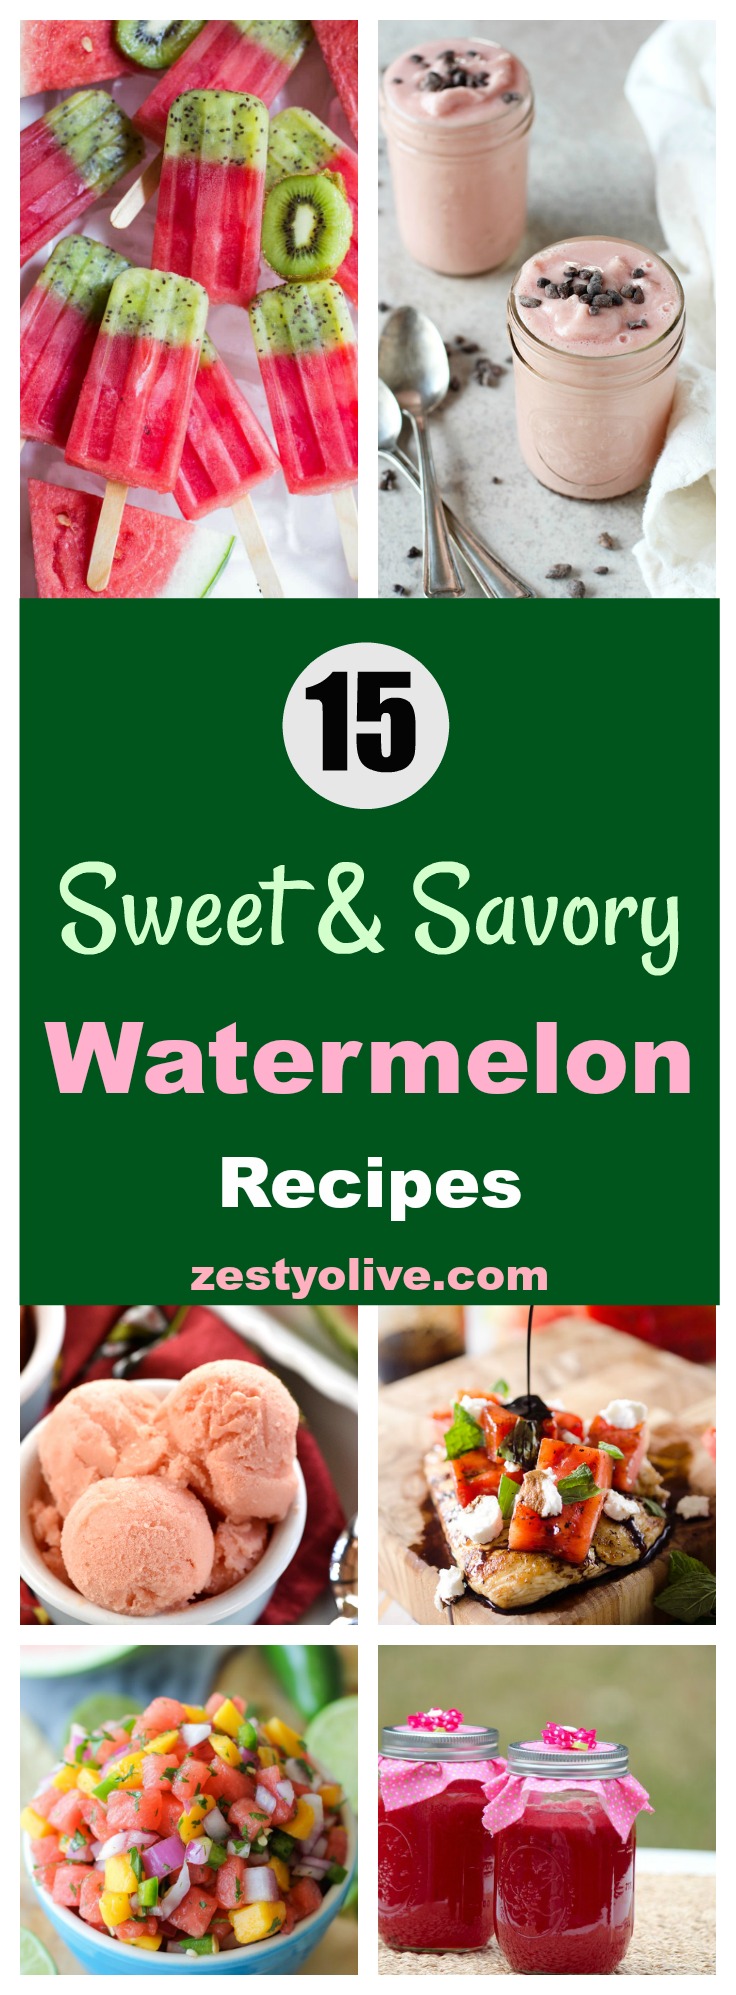 15 Sweet and Savory Watermelon Recipes for Summer